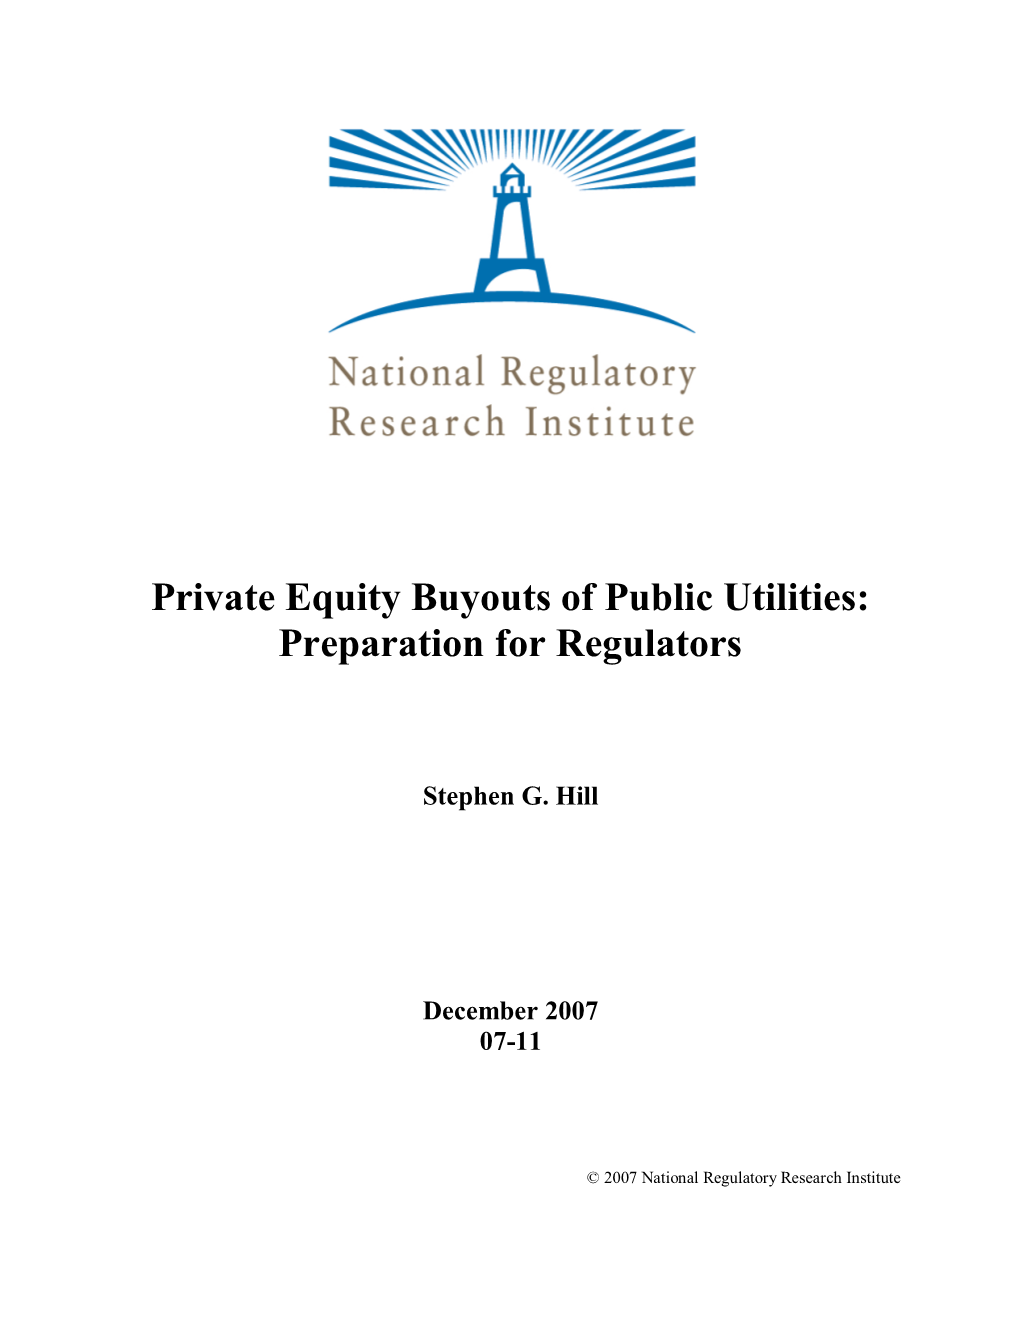 Private Equity Buyouts of Public Utilities: Preparation for Regulators